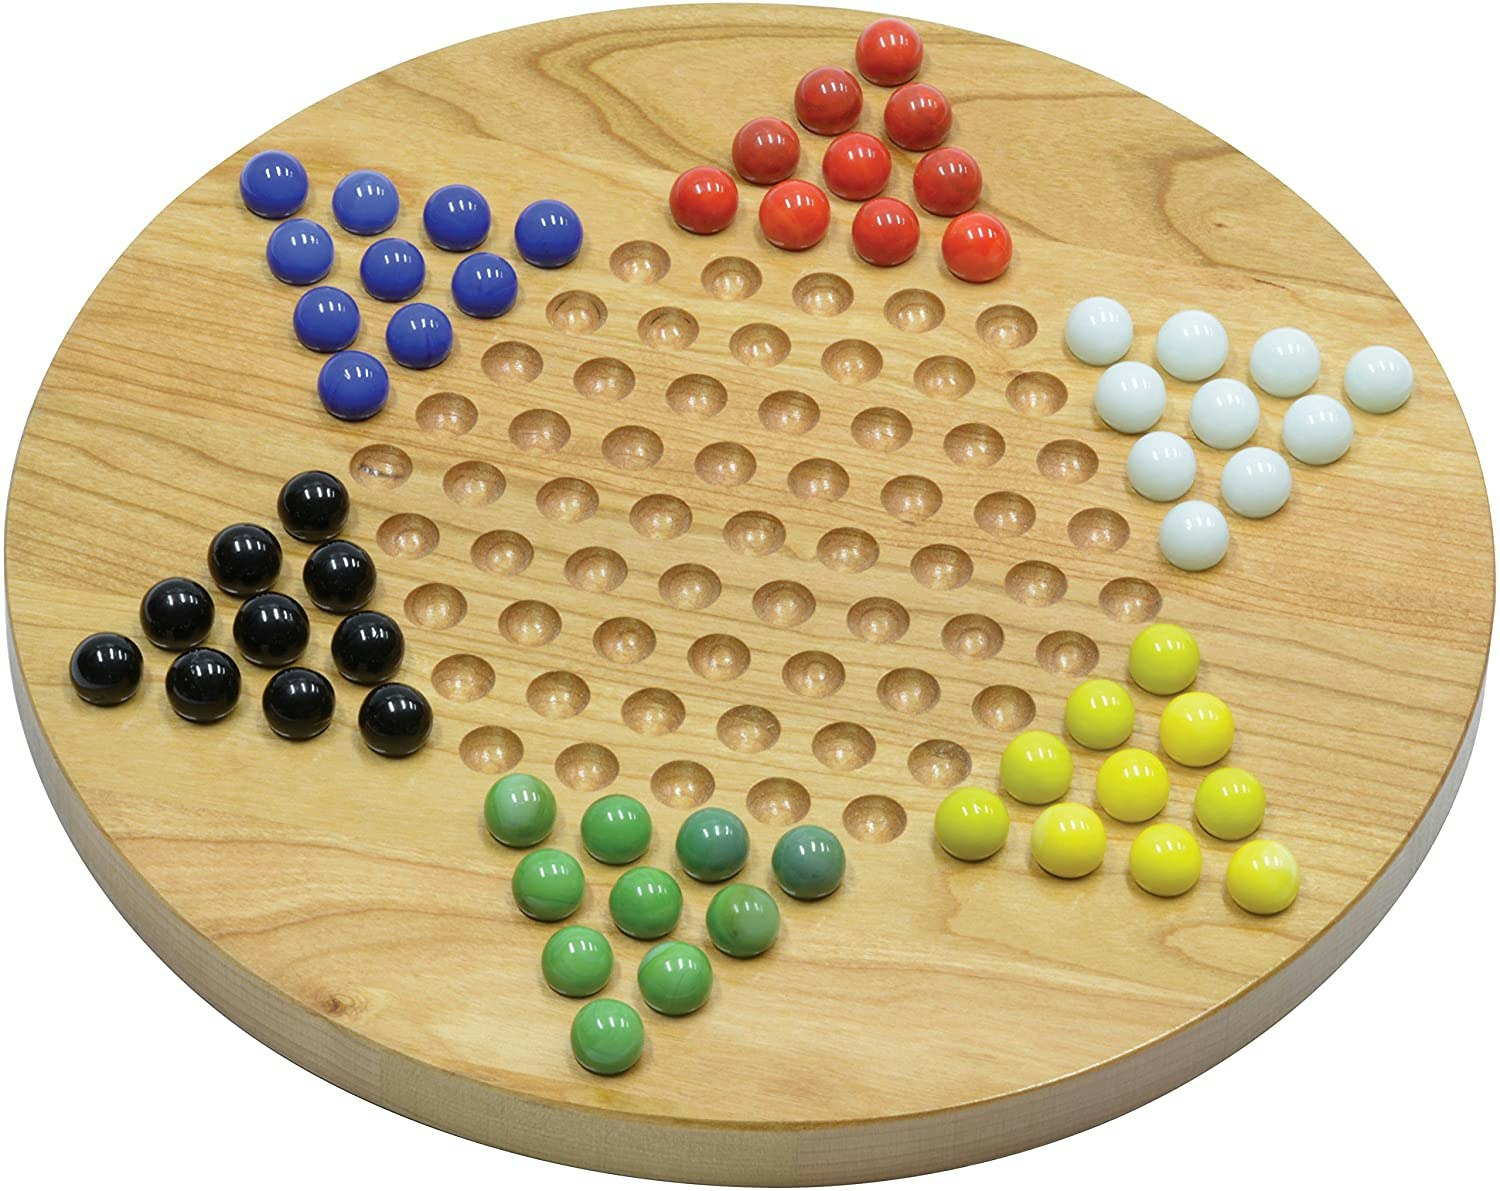 3 player chinese checkers